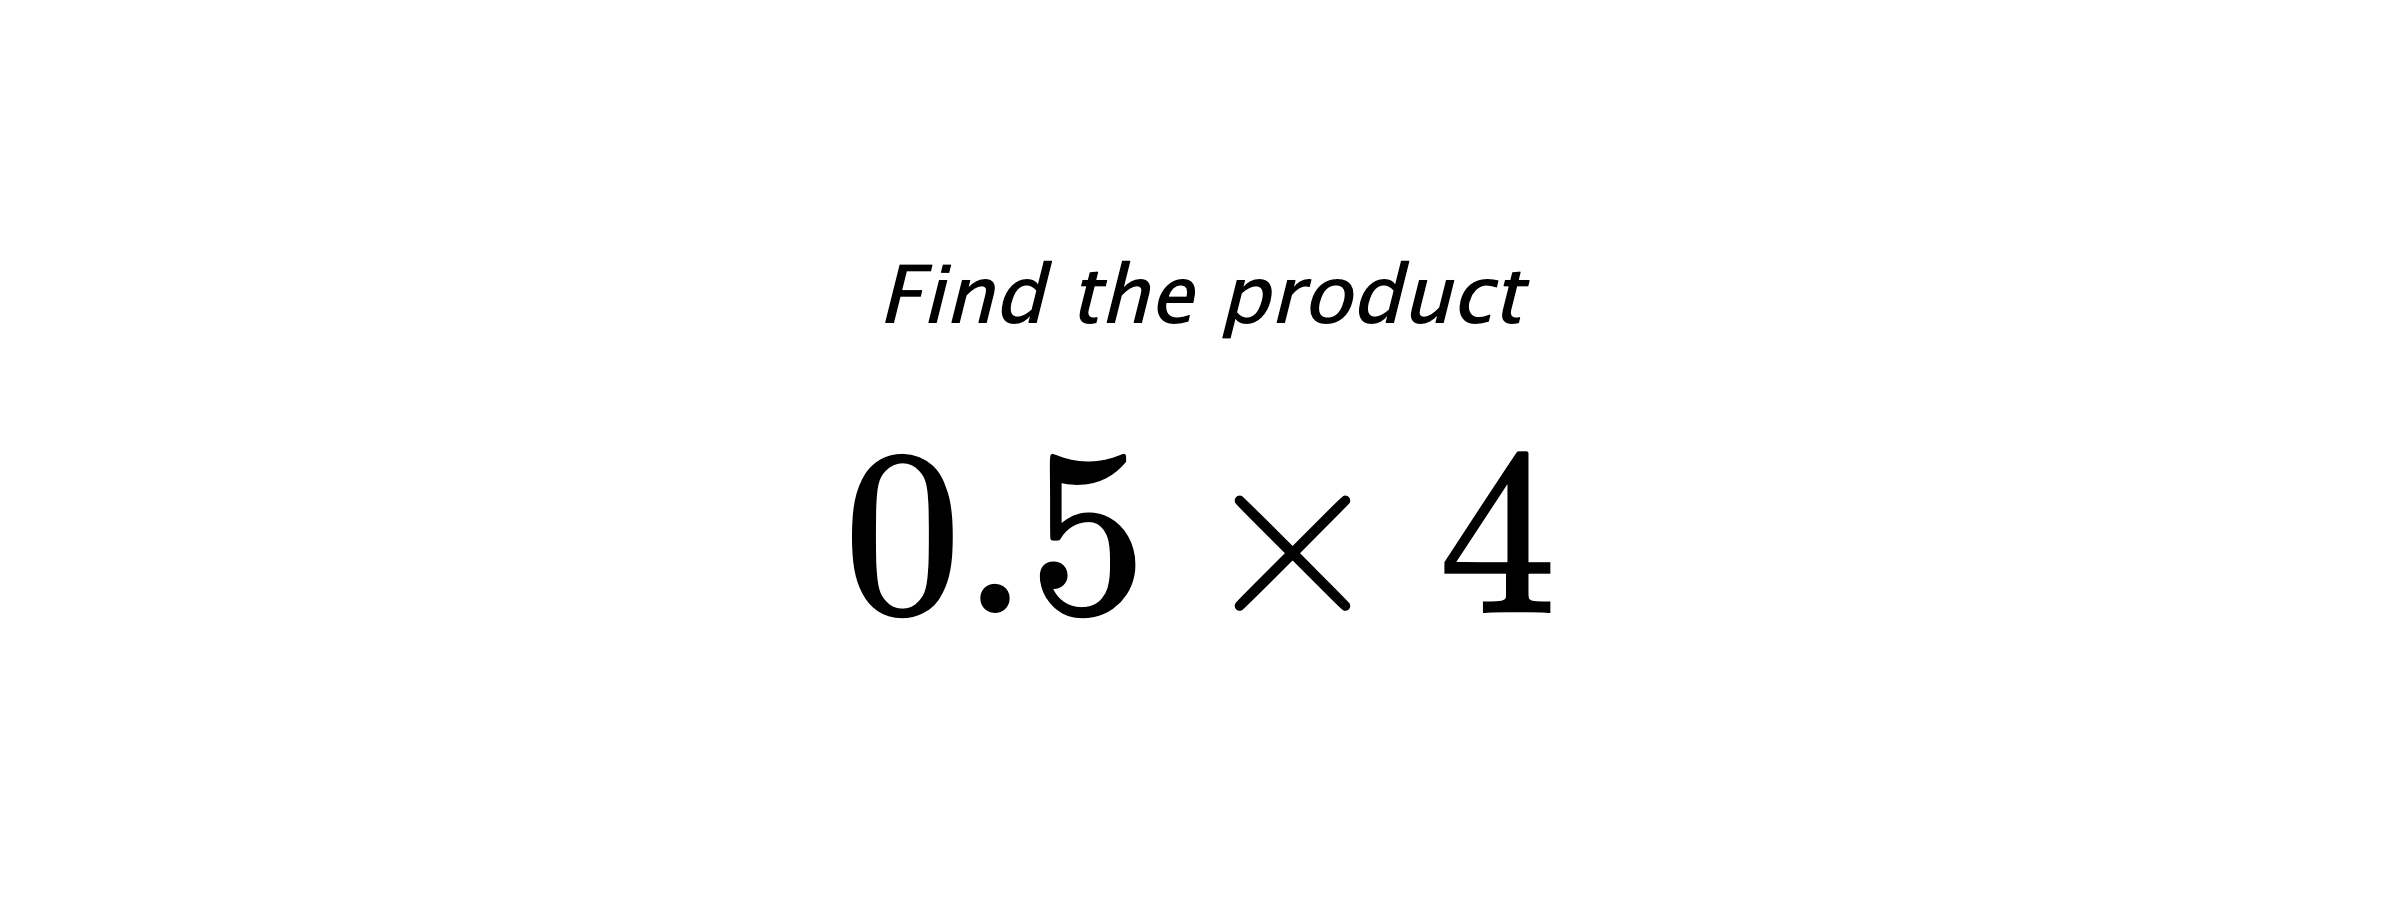 Find the product $ 0.5 \times 4 $